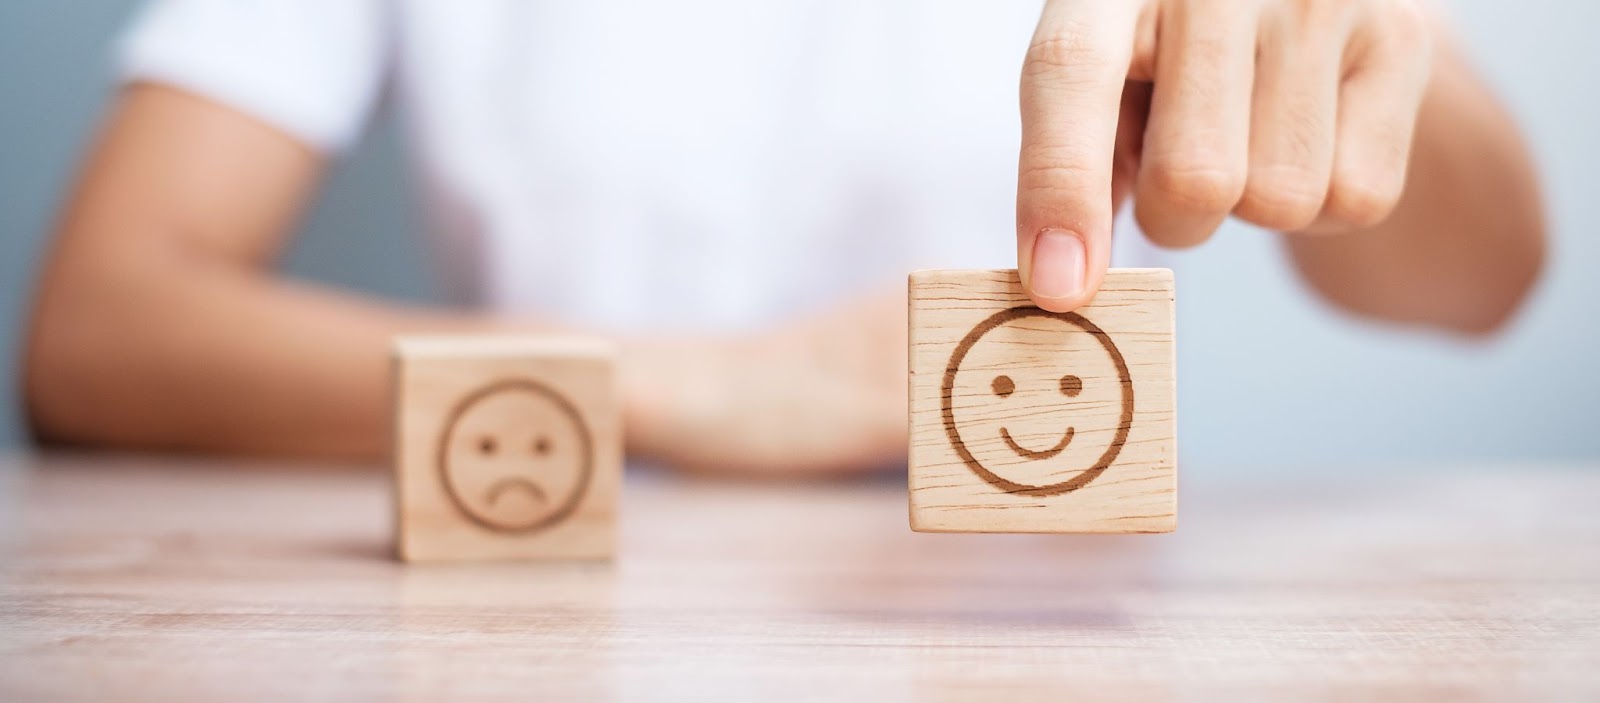 Two blocks of wood with happy and sad smiley faces, representing positive and negative sentiment